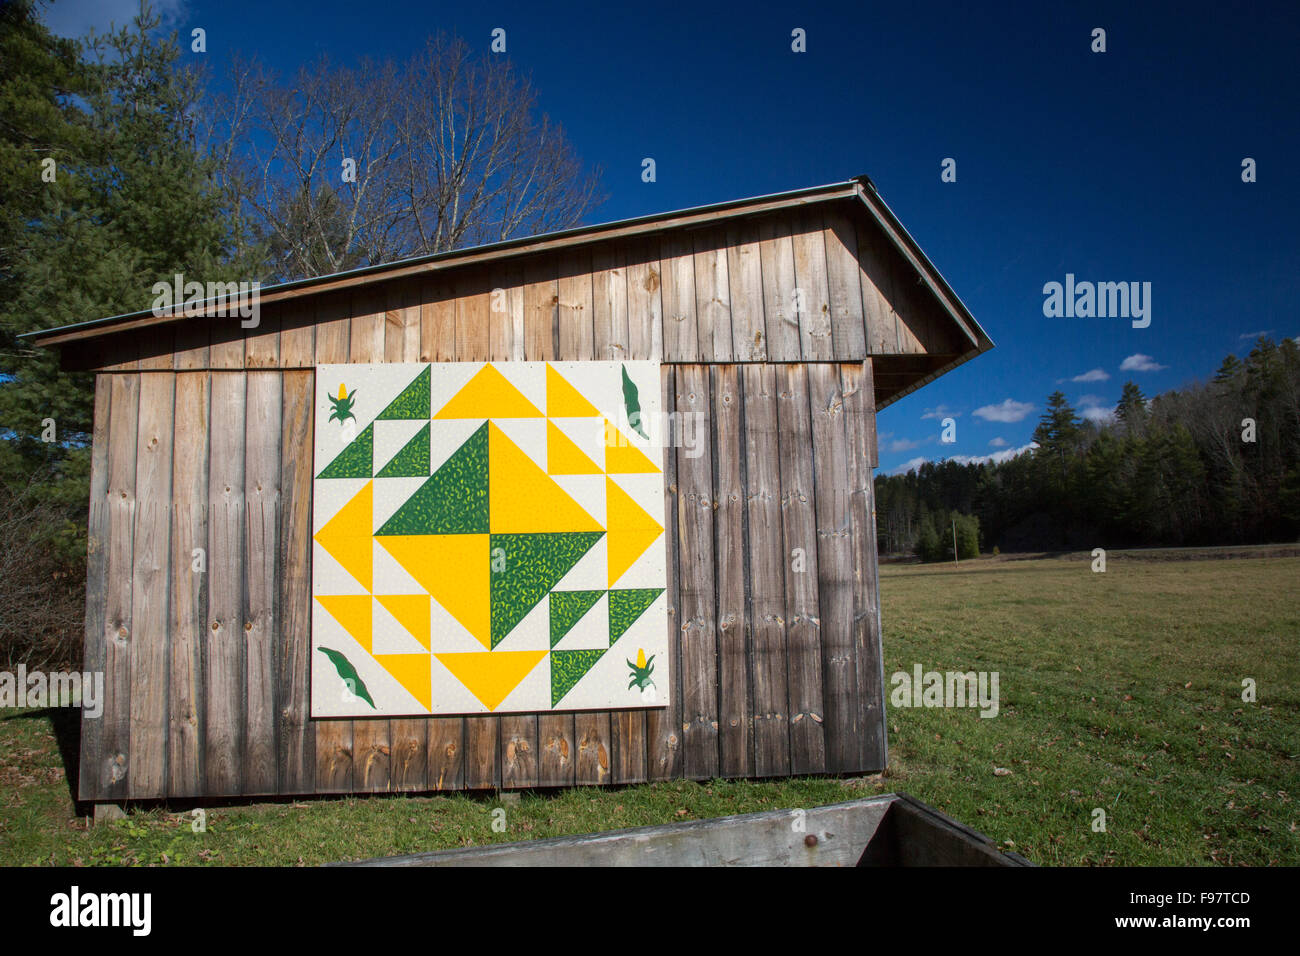 Rimel, West Virginia - Corn & Beans, a quilt pattern on a shed in Pocahontas County. Stock Photo